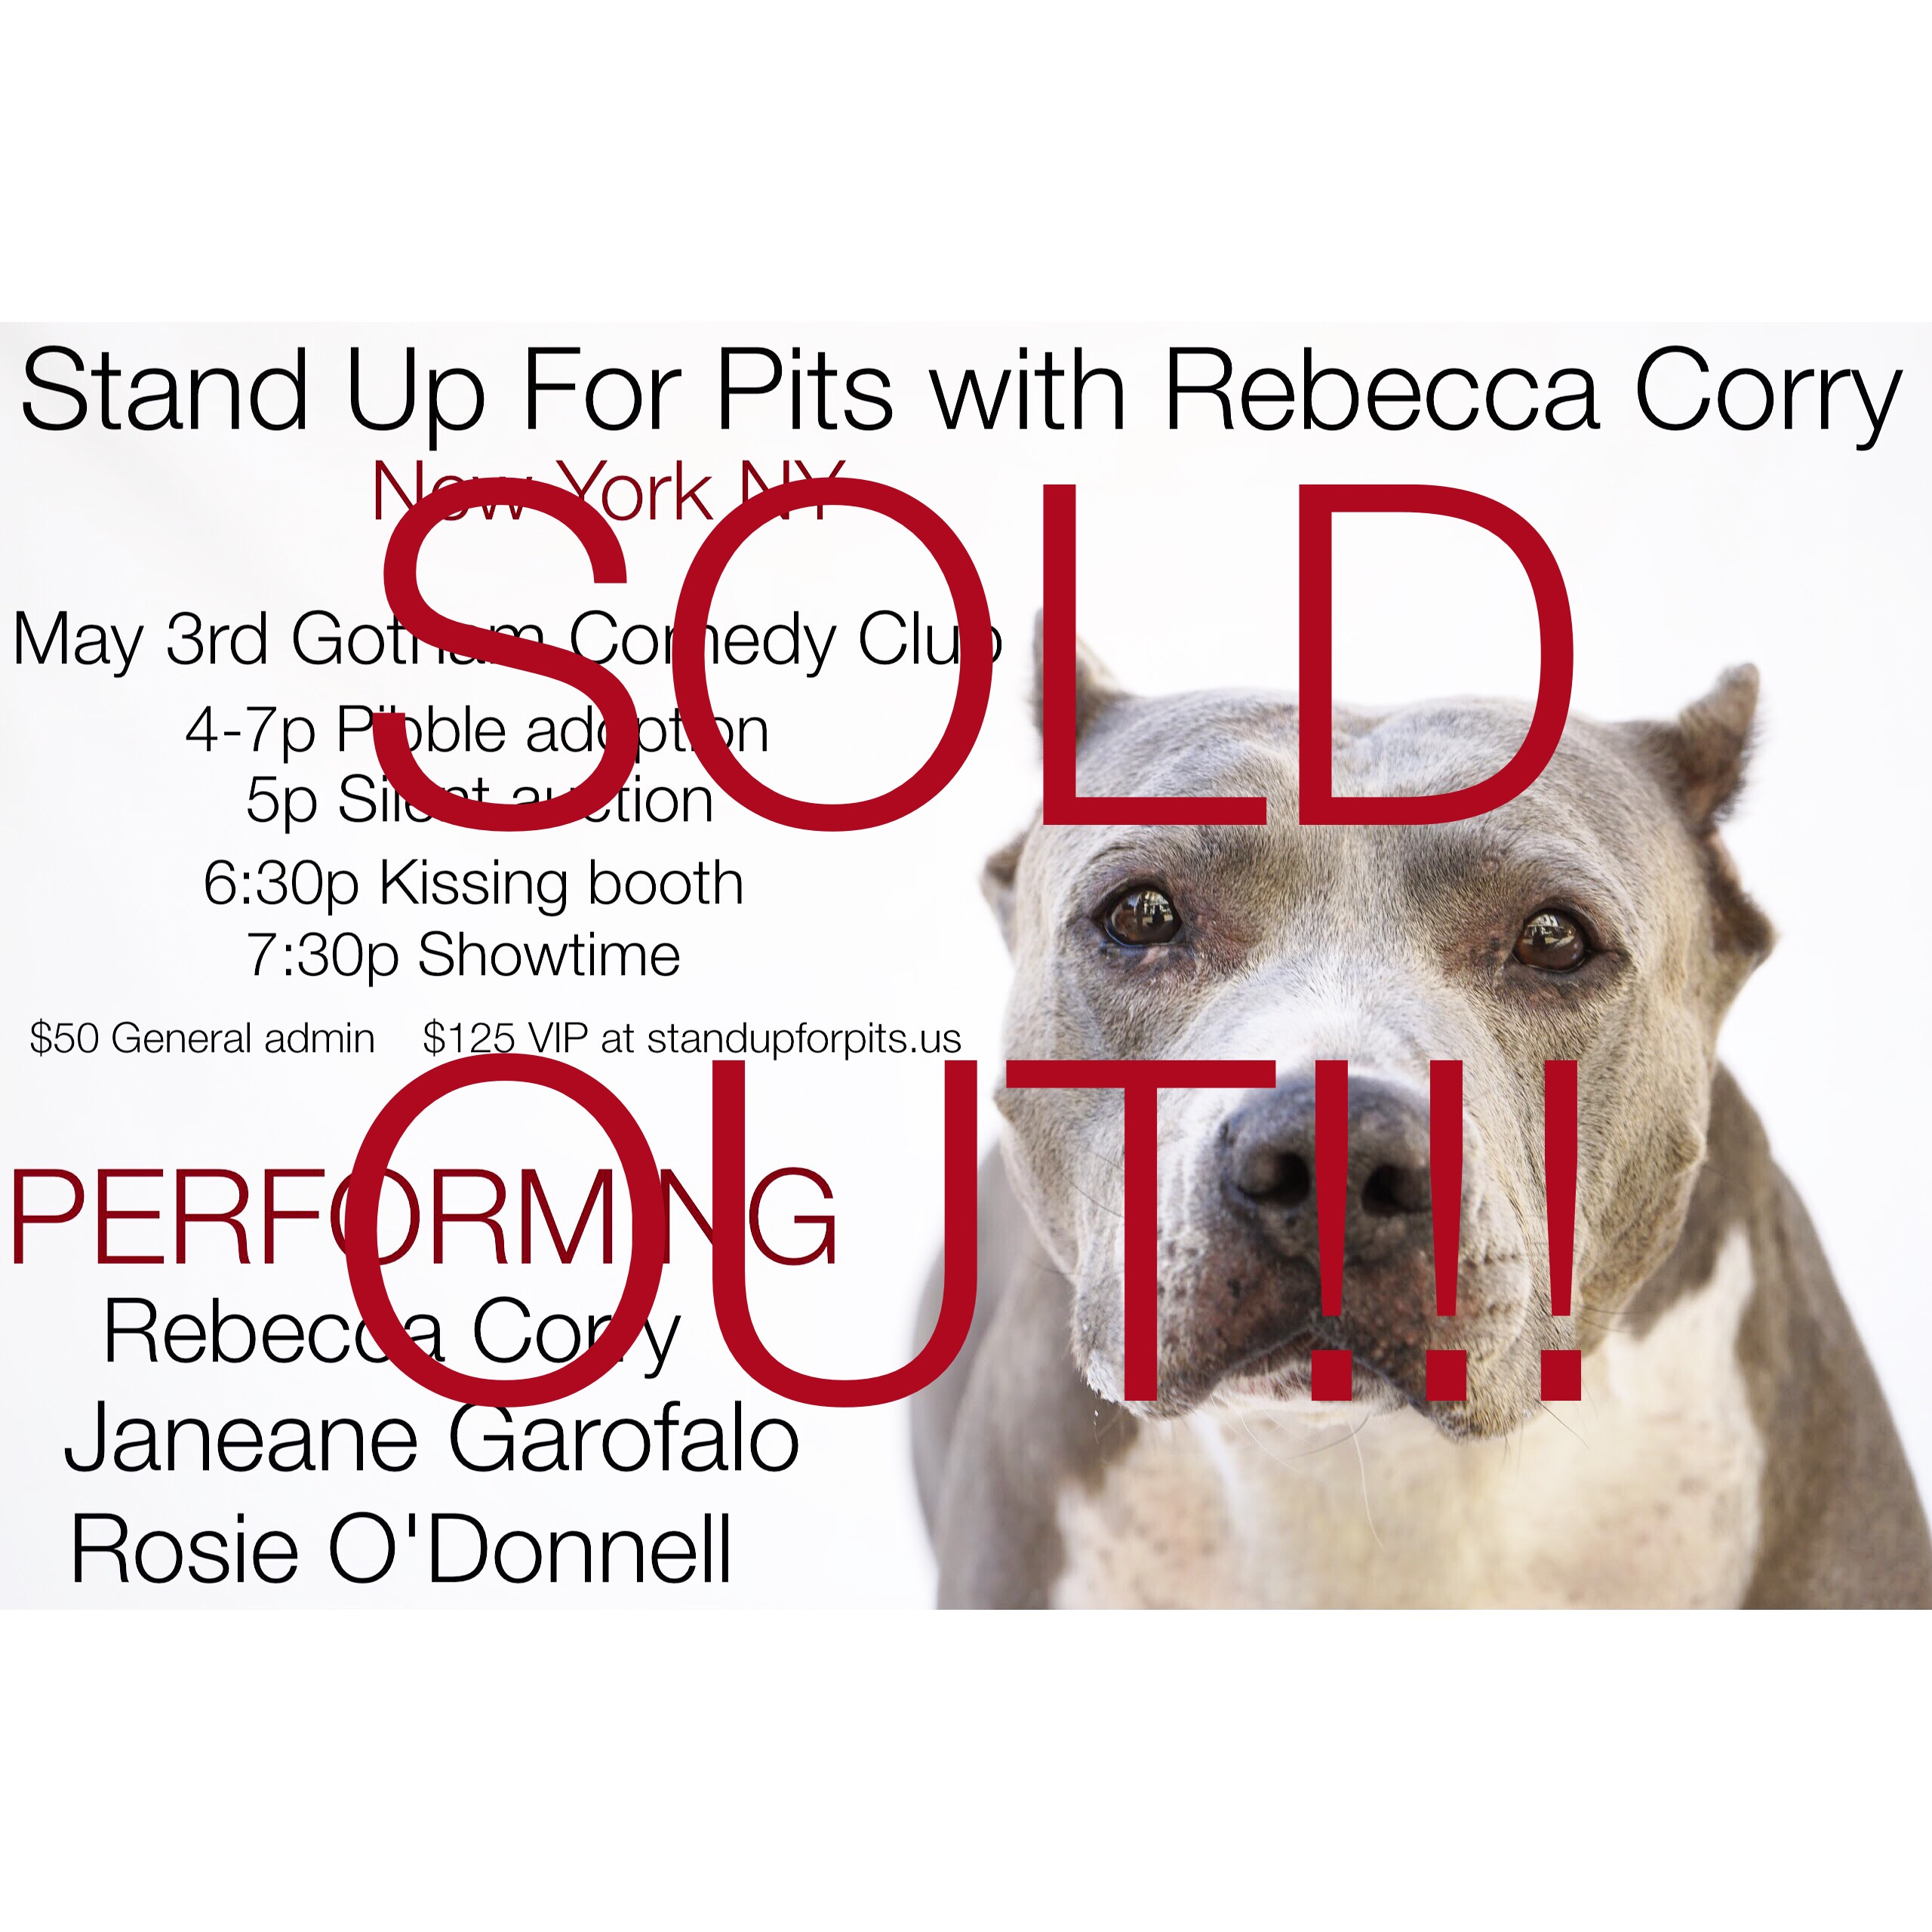 NYC stand up for pits is sold out!!!!!!!